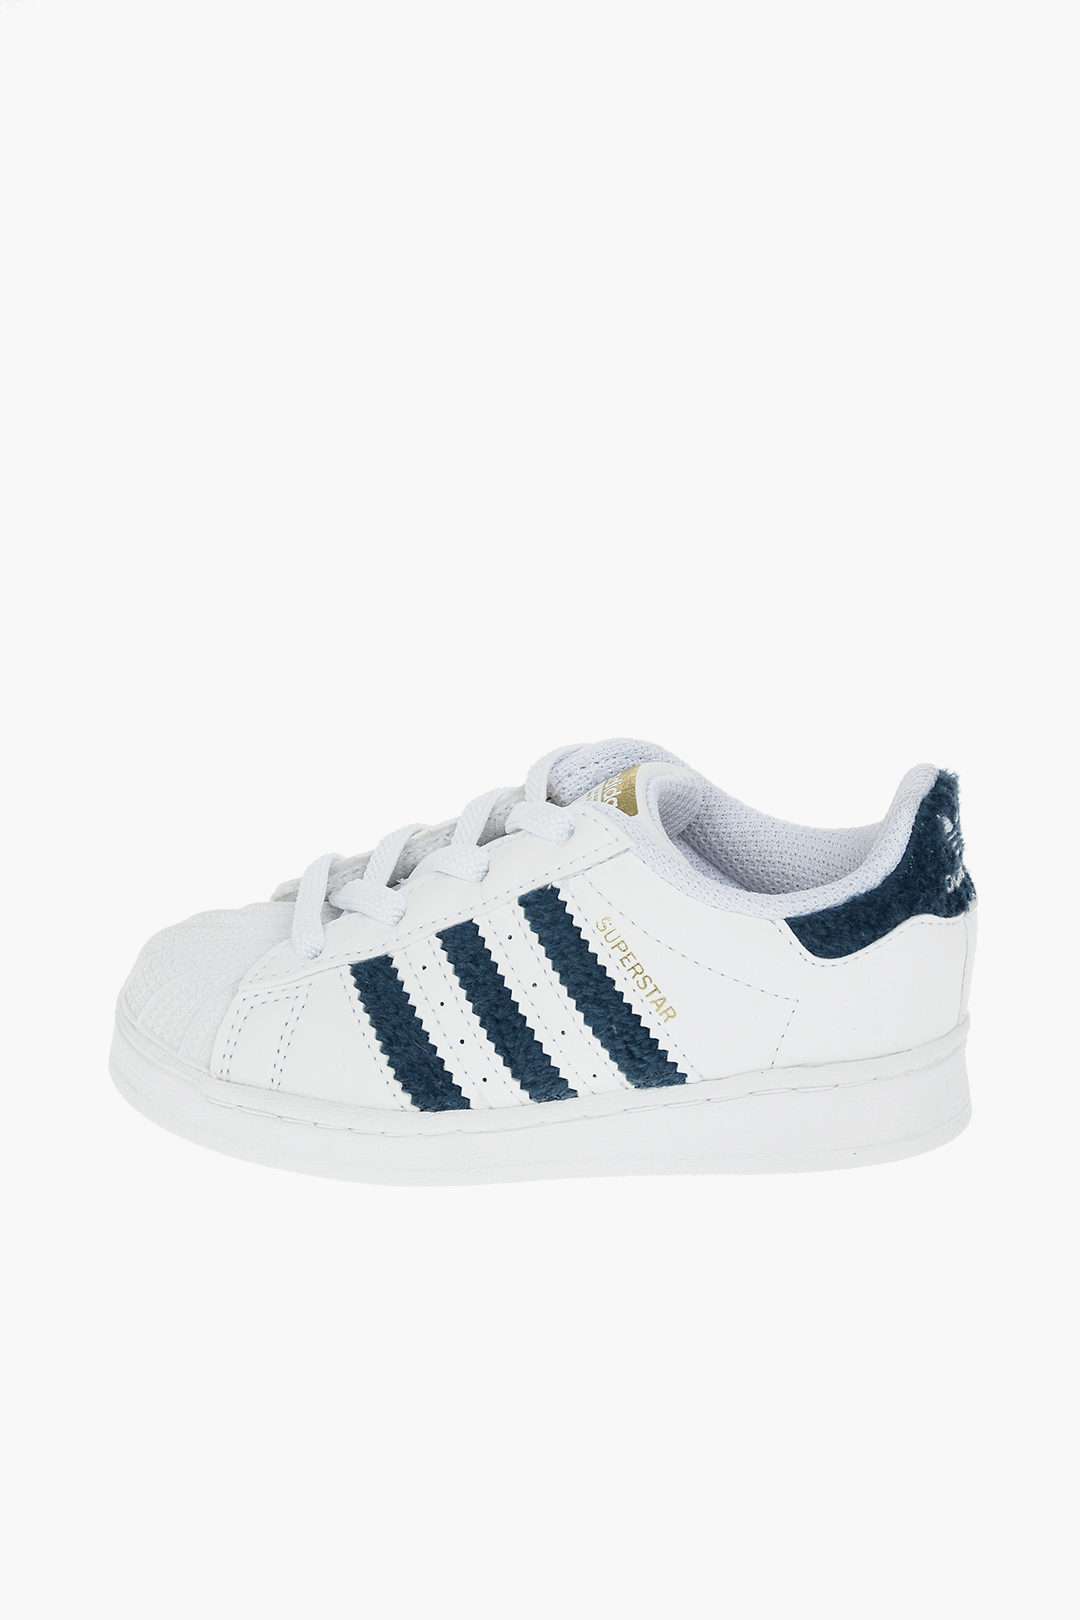 namens vasthouden wastafel Adidas Kids leather SUPERSTAR EL I sneakers with fabric trimmings unisex  children boys girls - Glamood Outlet